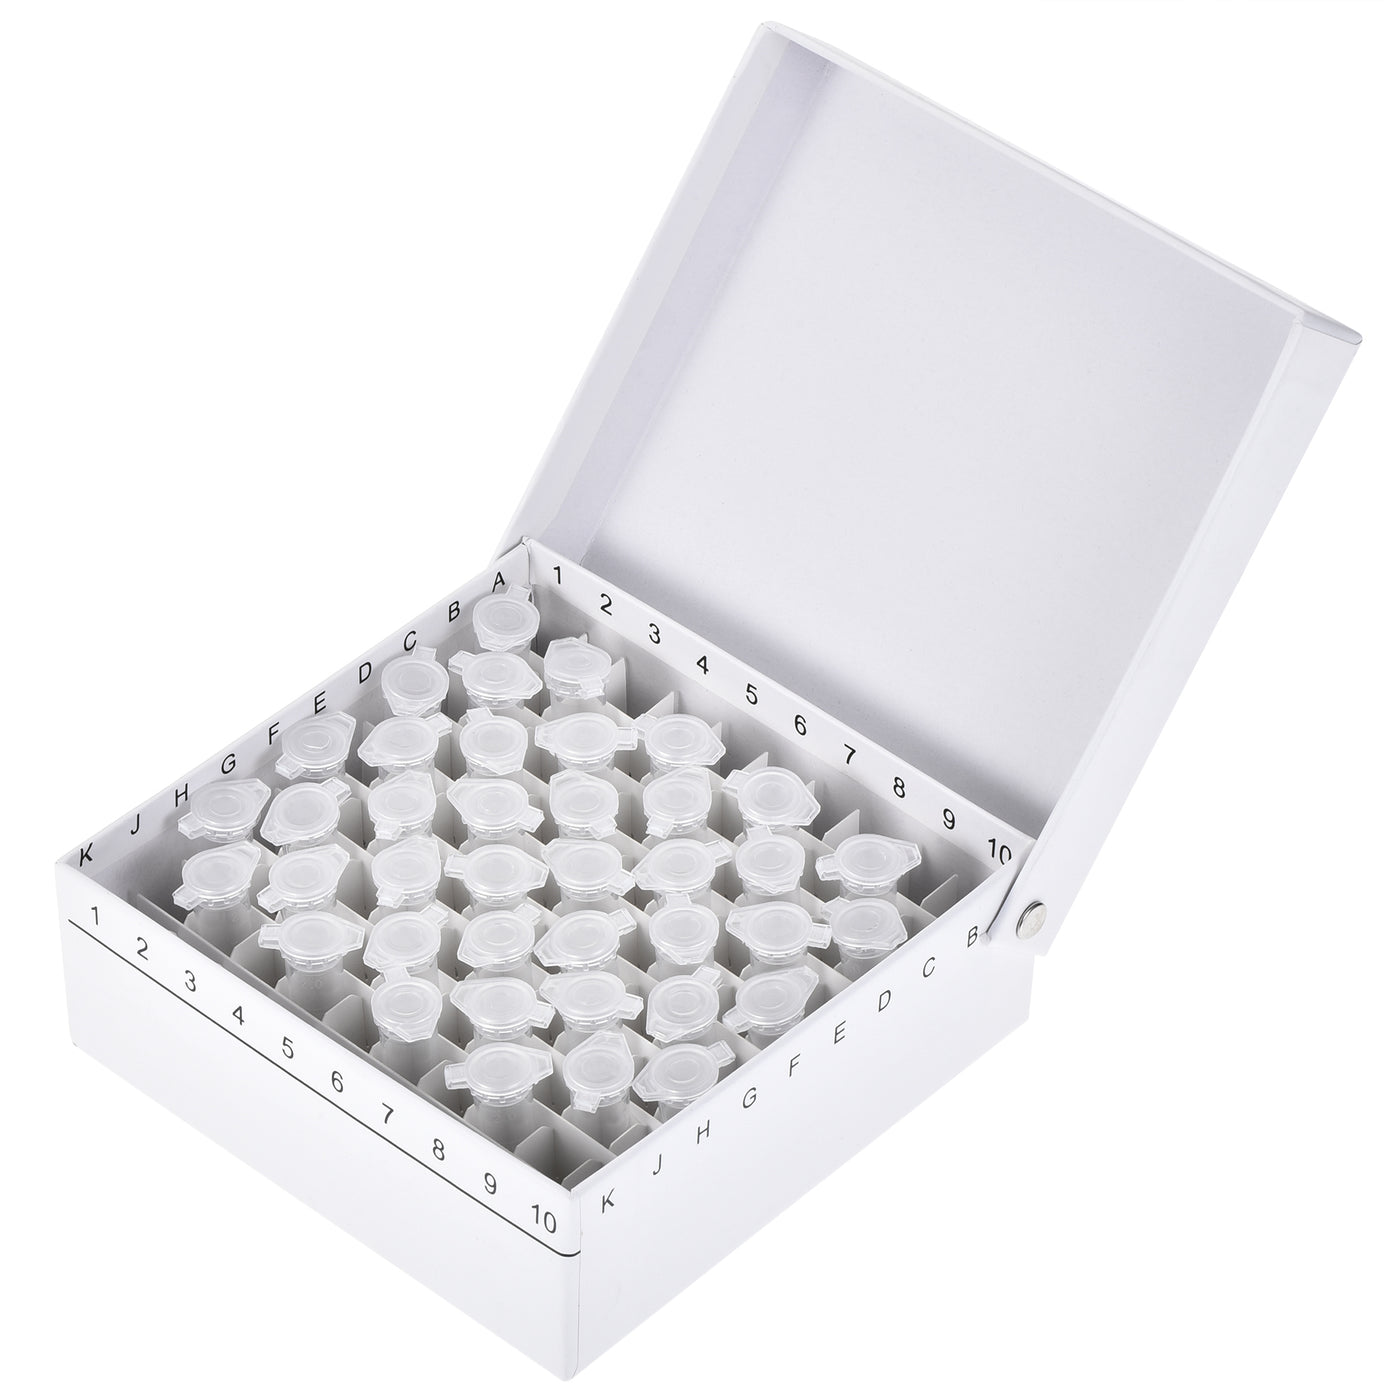 uxcell Uxcell Centrifuge Tube Holder 100-Well Waterproof Cardboard White for 1.5/1.8/2ml Tubes